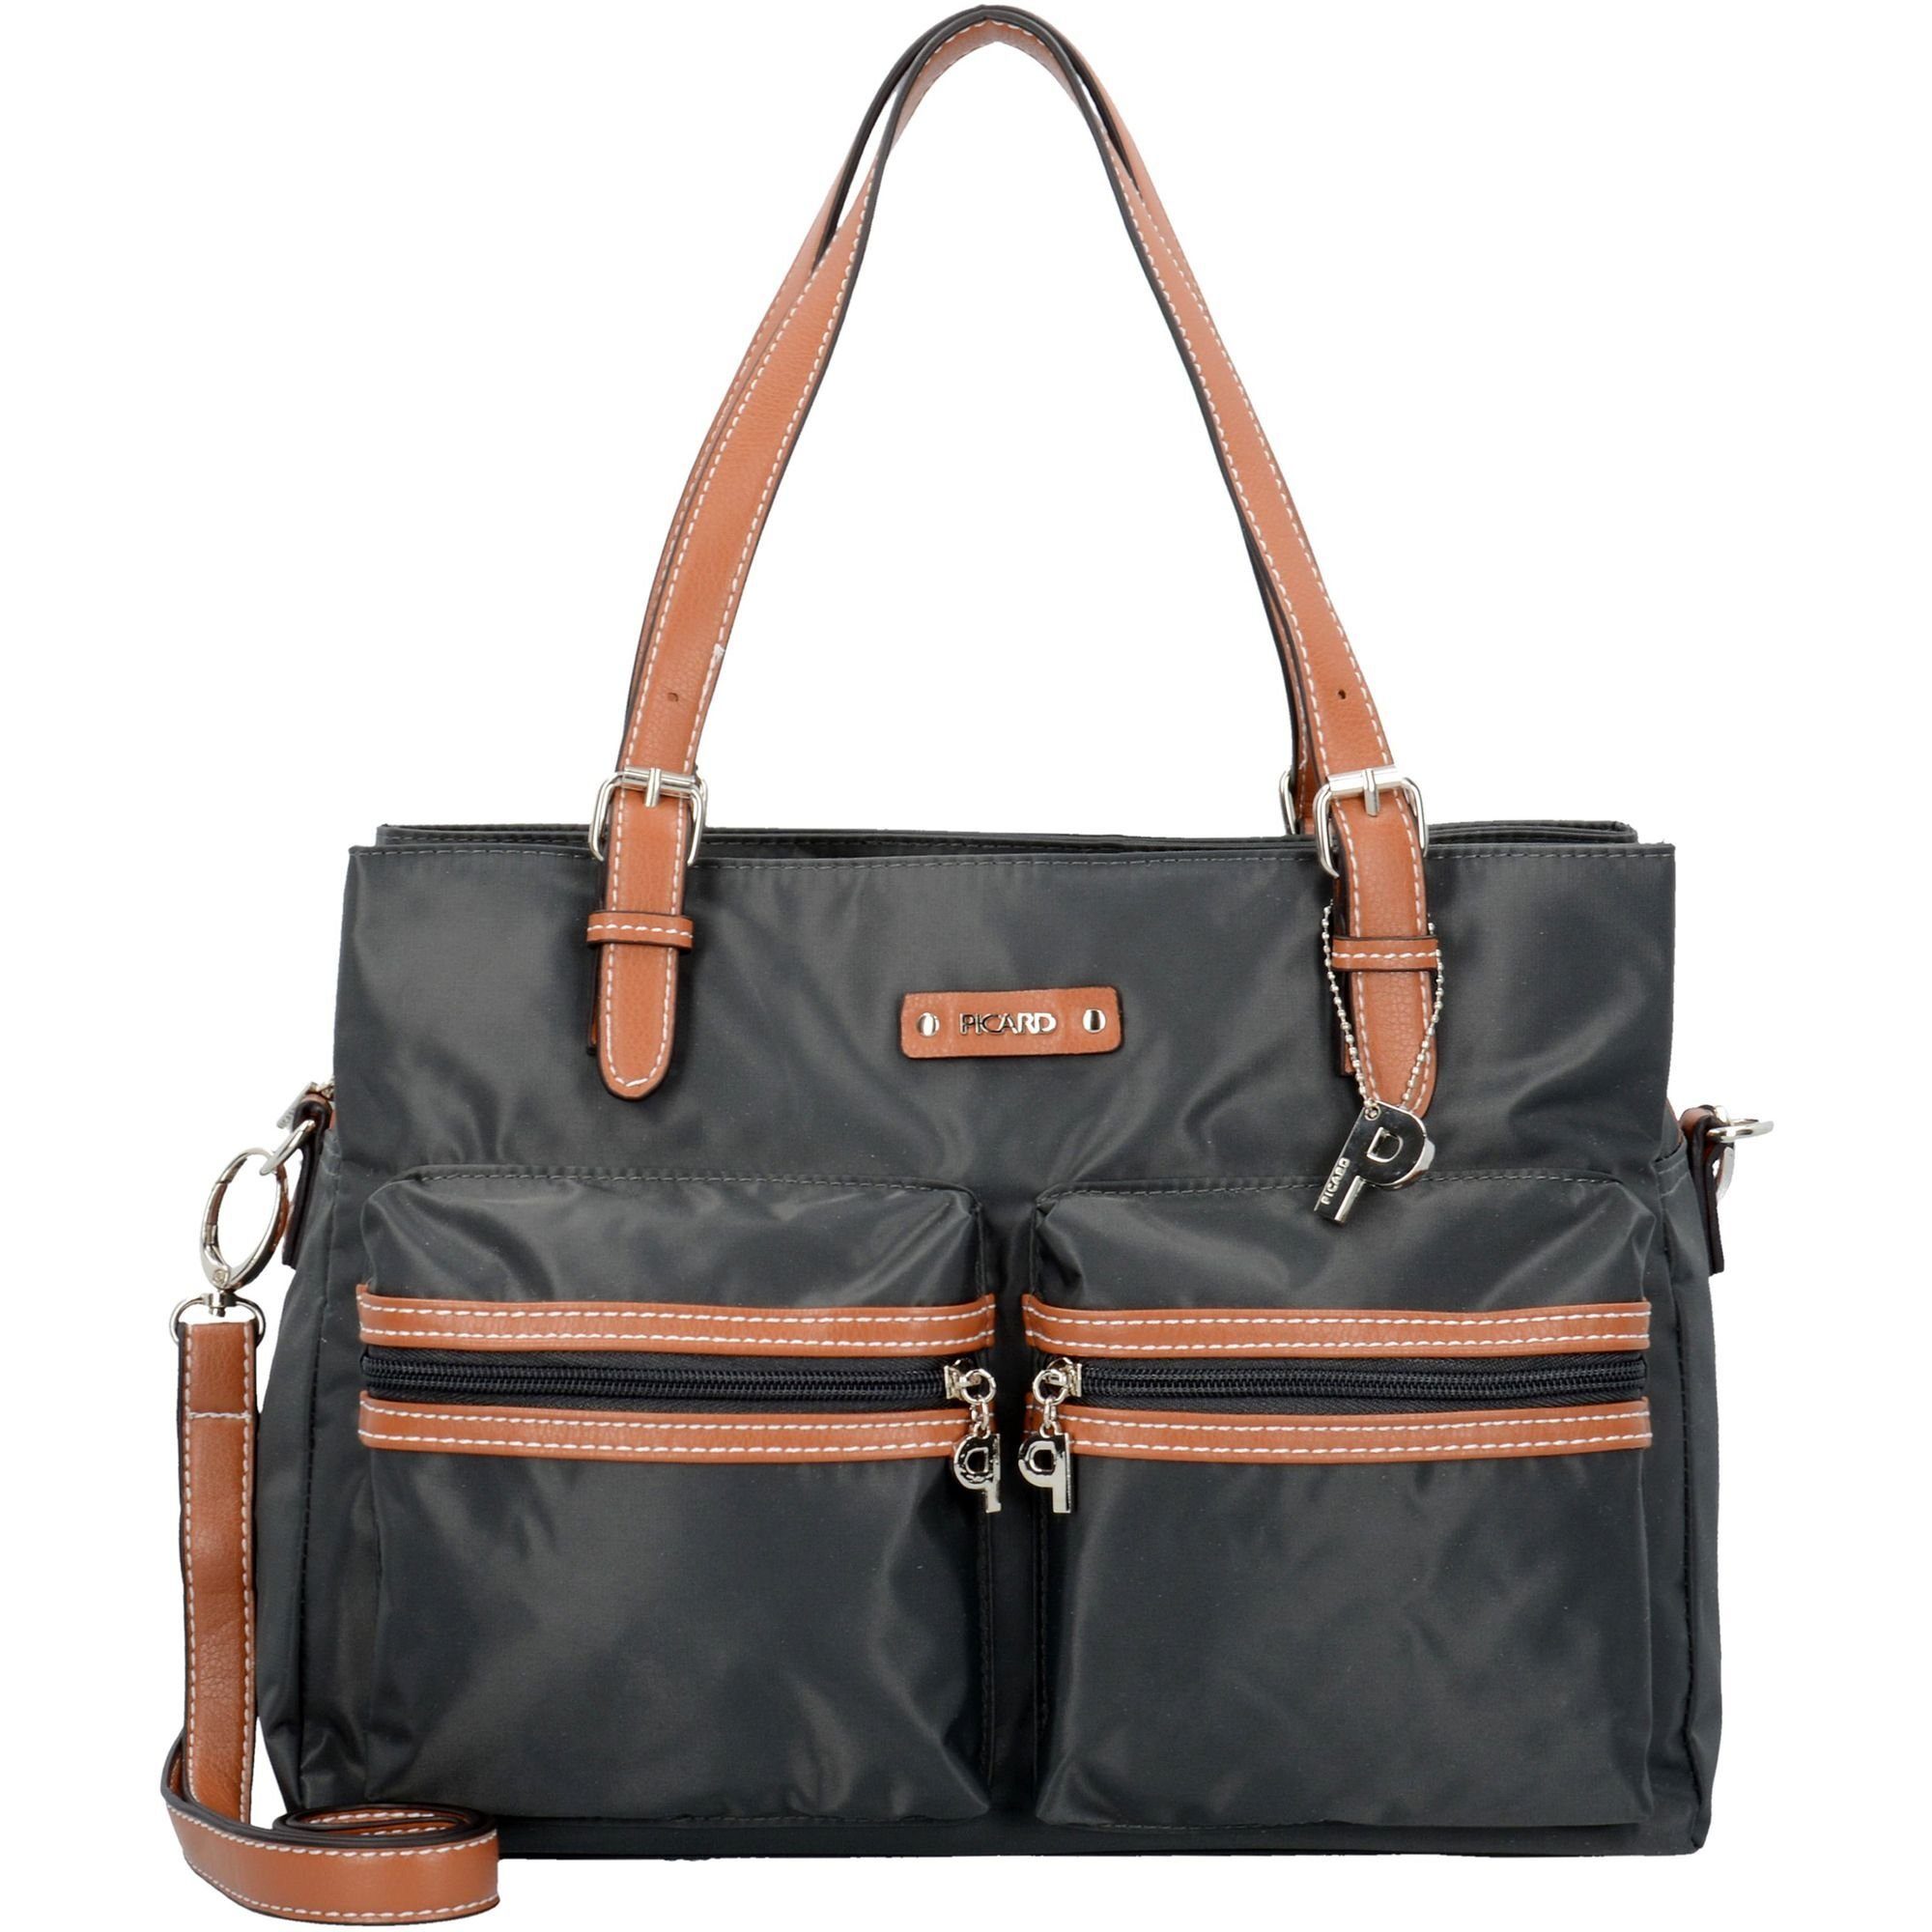 Picard Schultertasche Sonja, Polyester